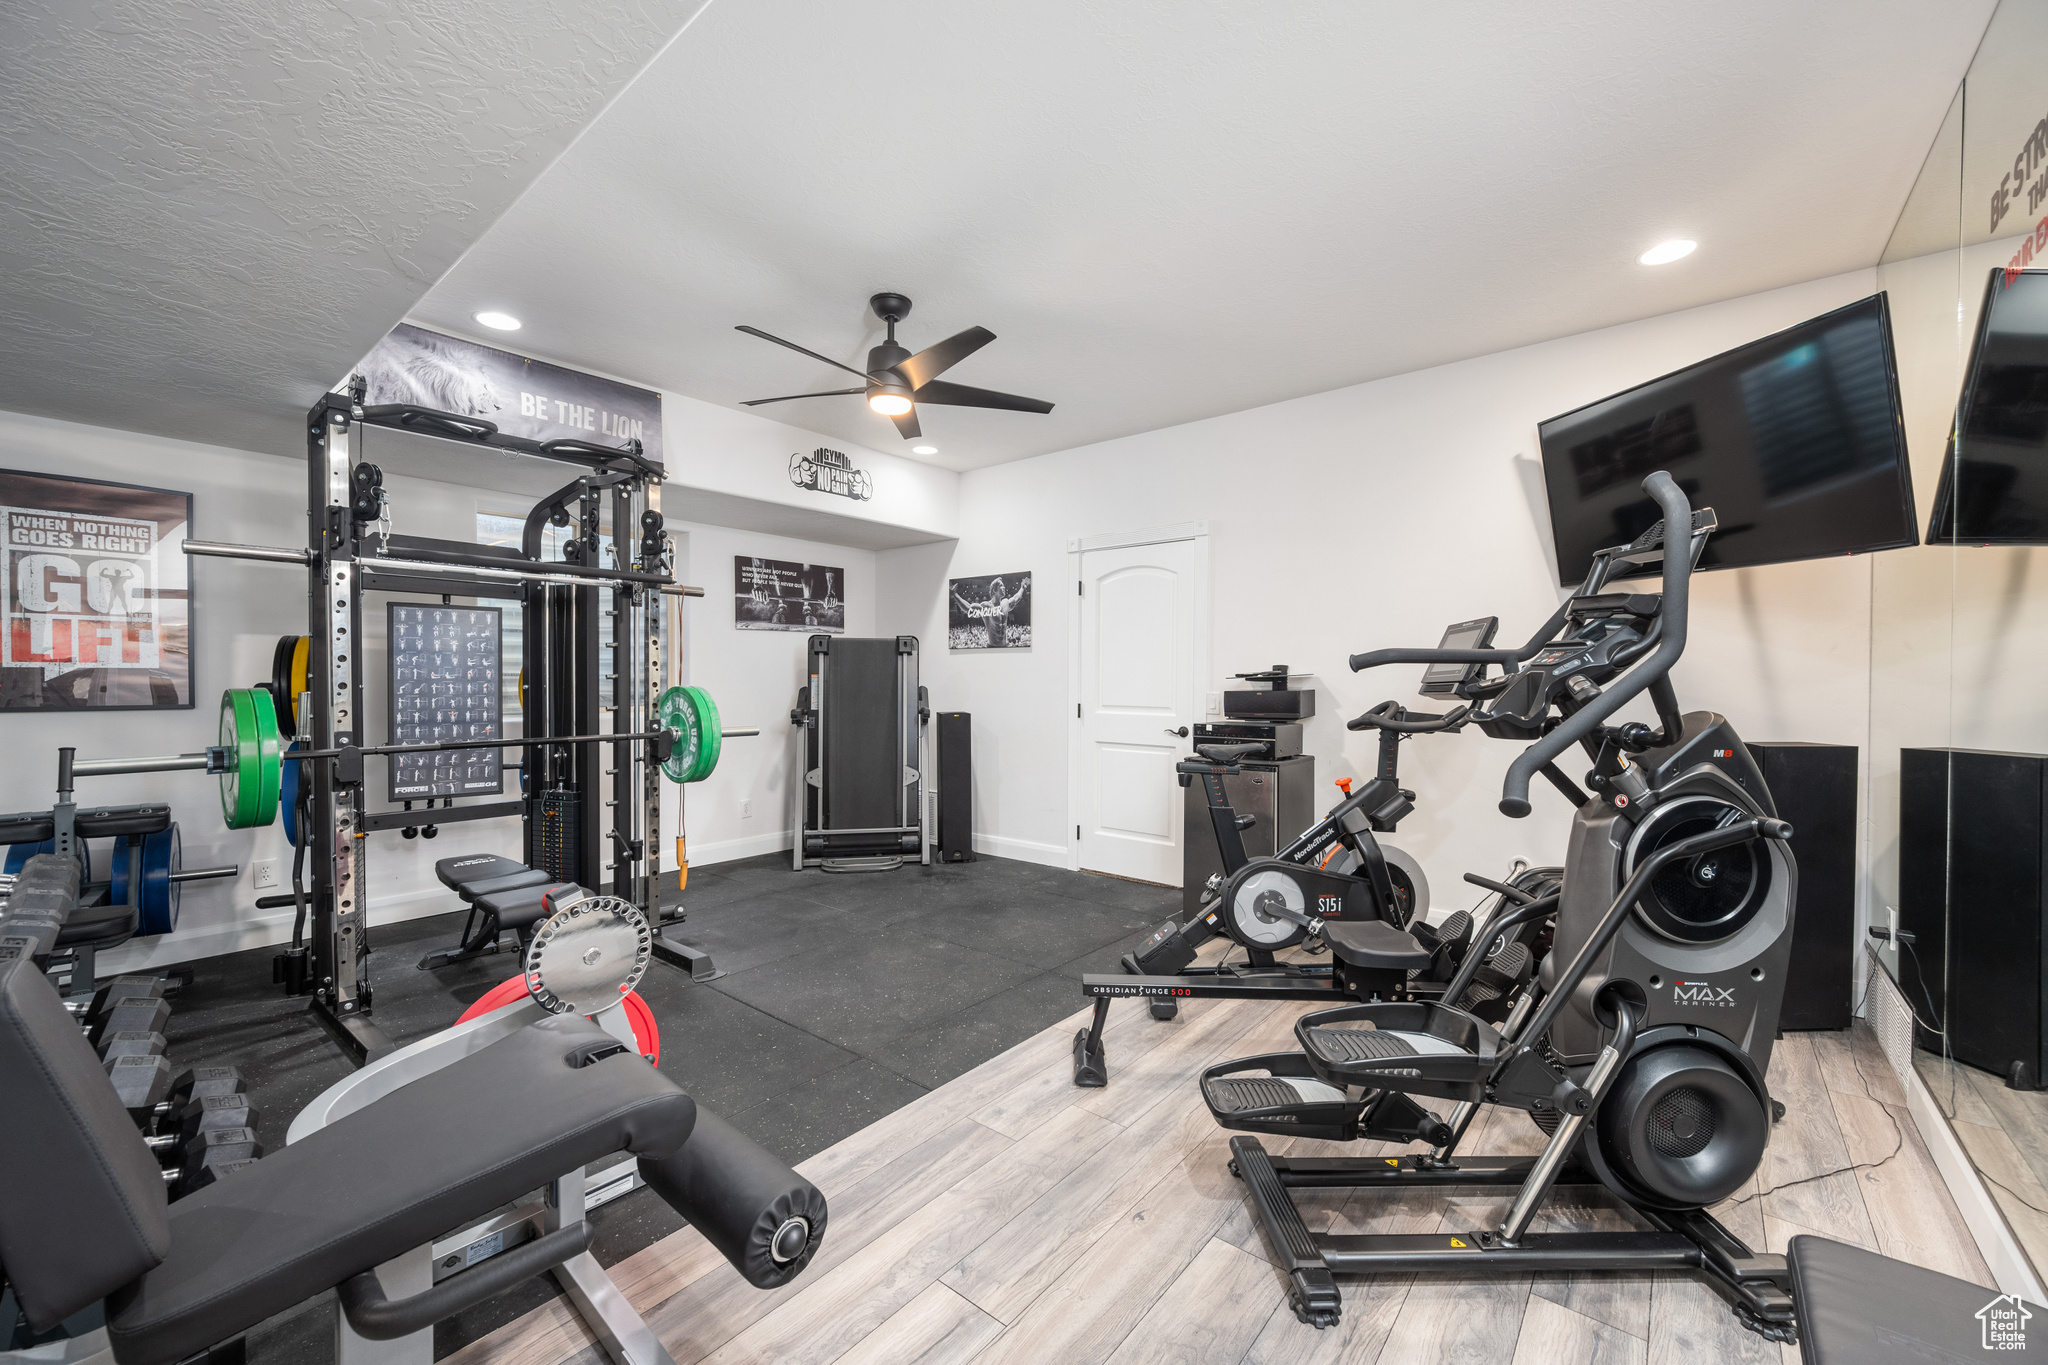 Exercise room featuring light hardwood / wood-style floors and ceiling fan